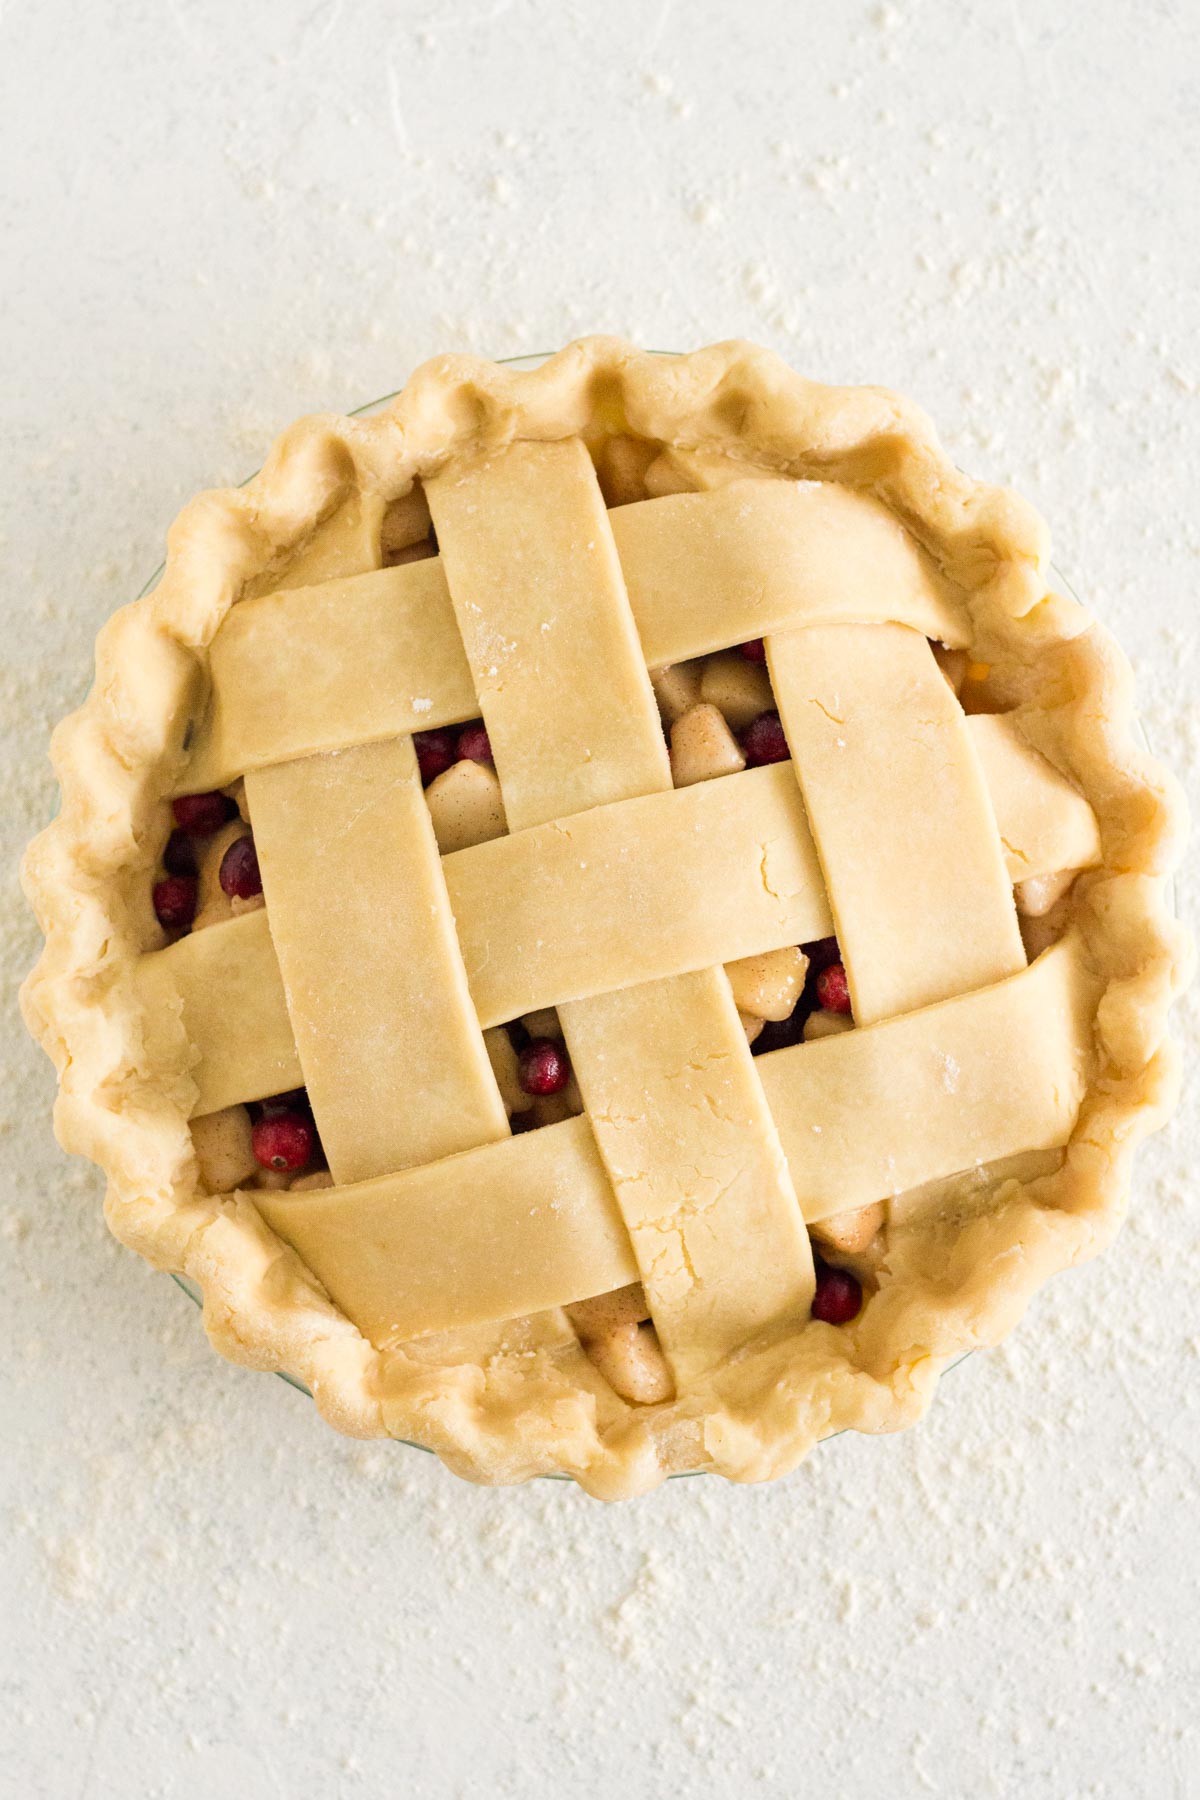 Overhead view of unbaked pie with lattice top on a white surface.